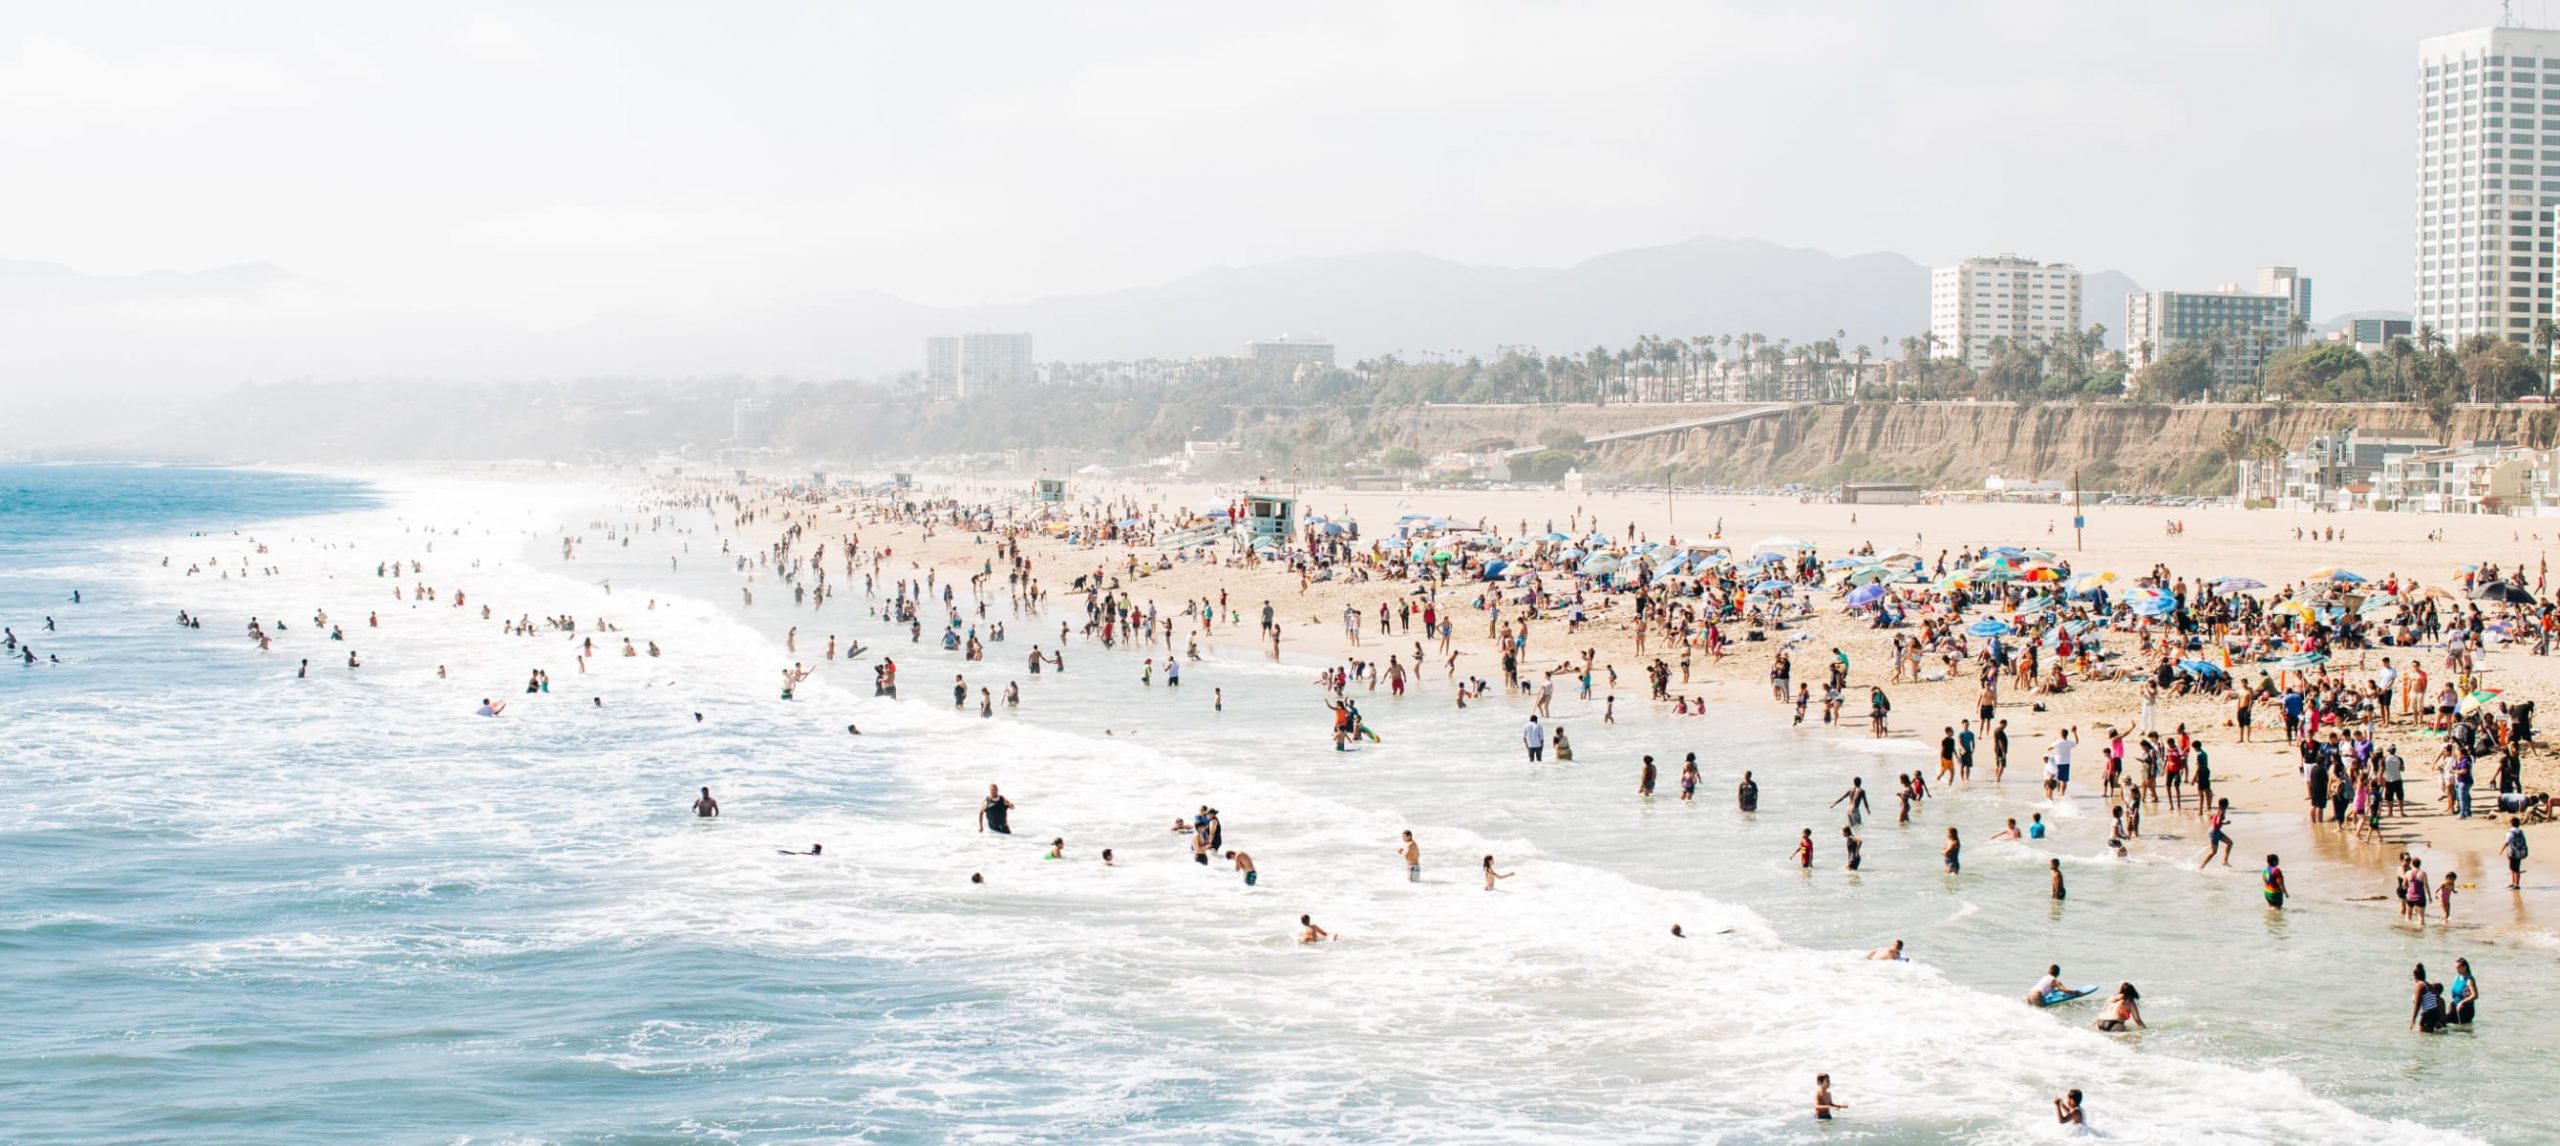 A southern California beach filled with people during the summer.